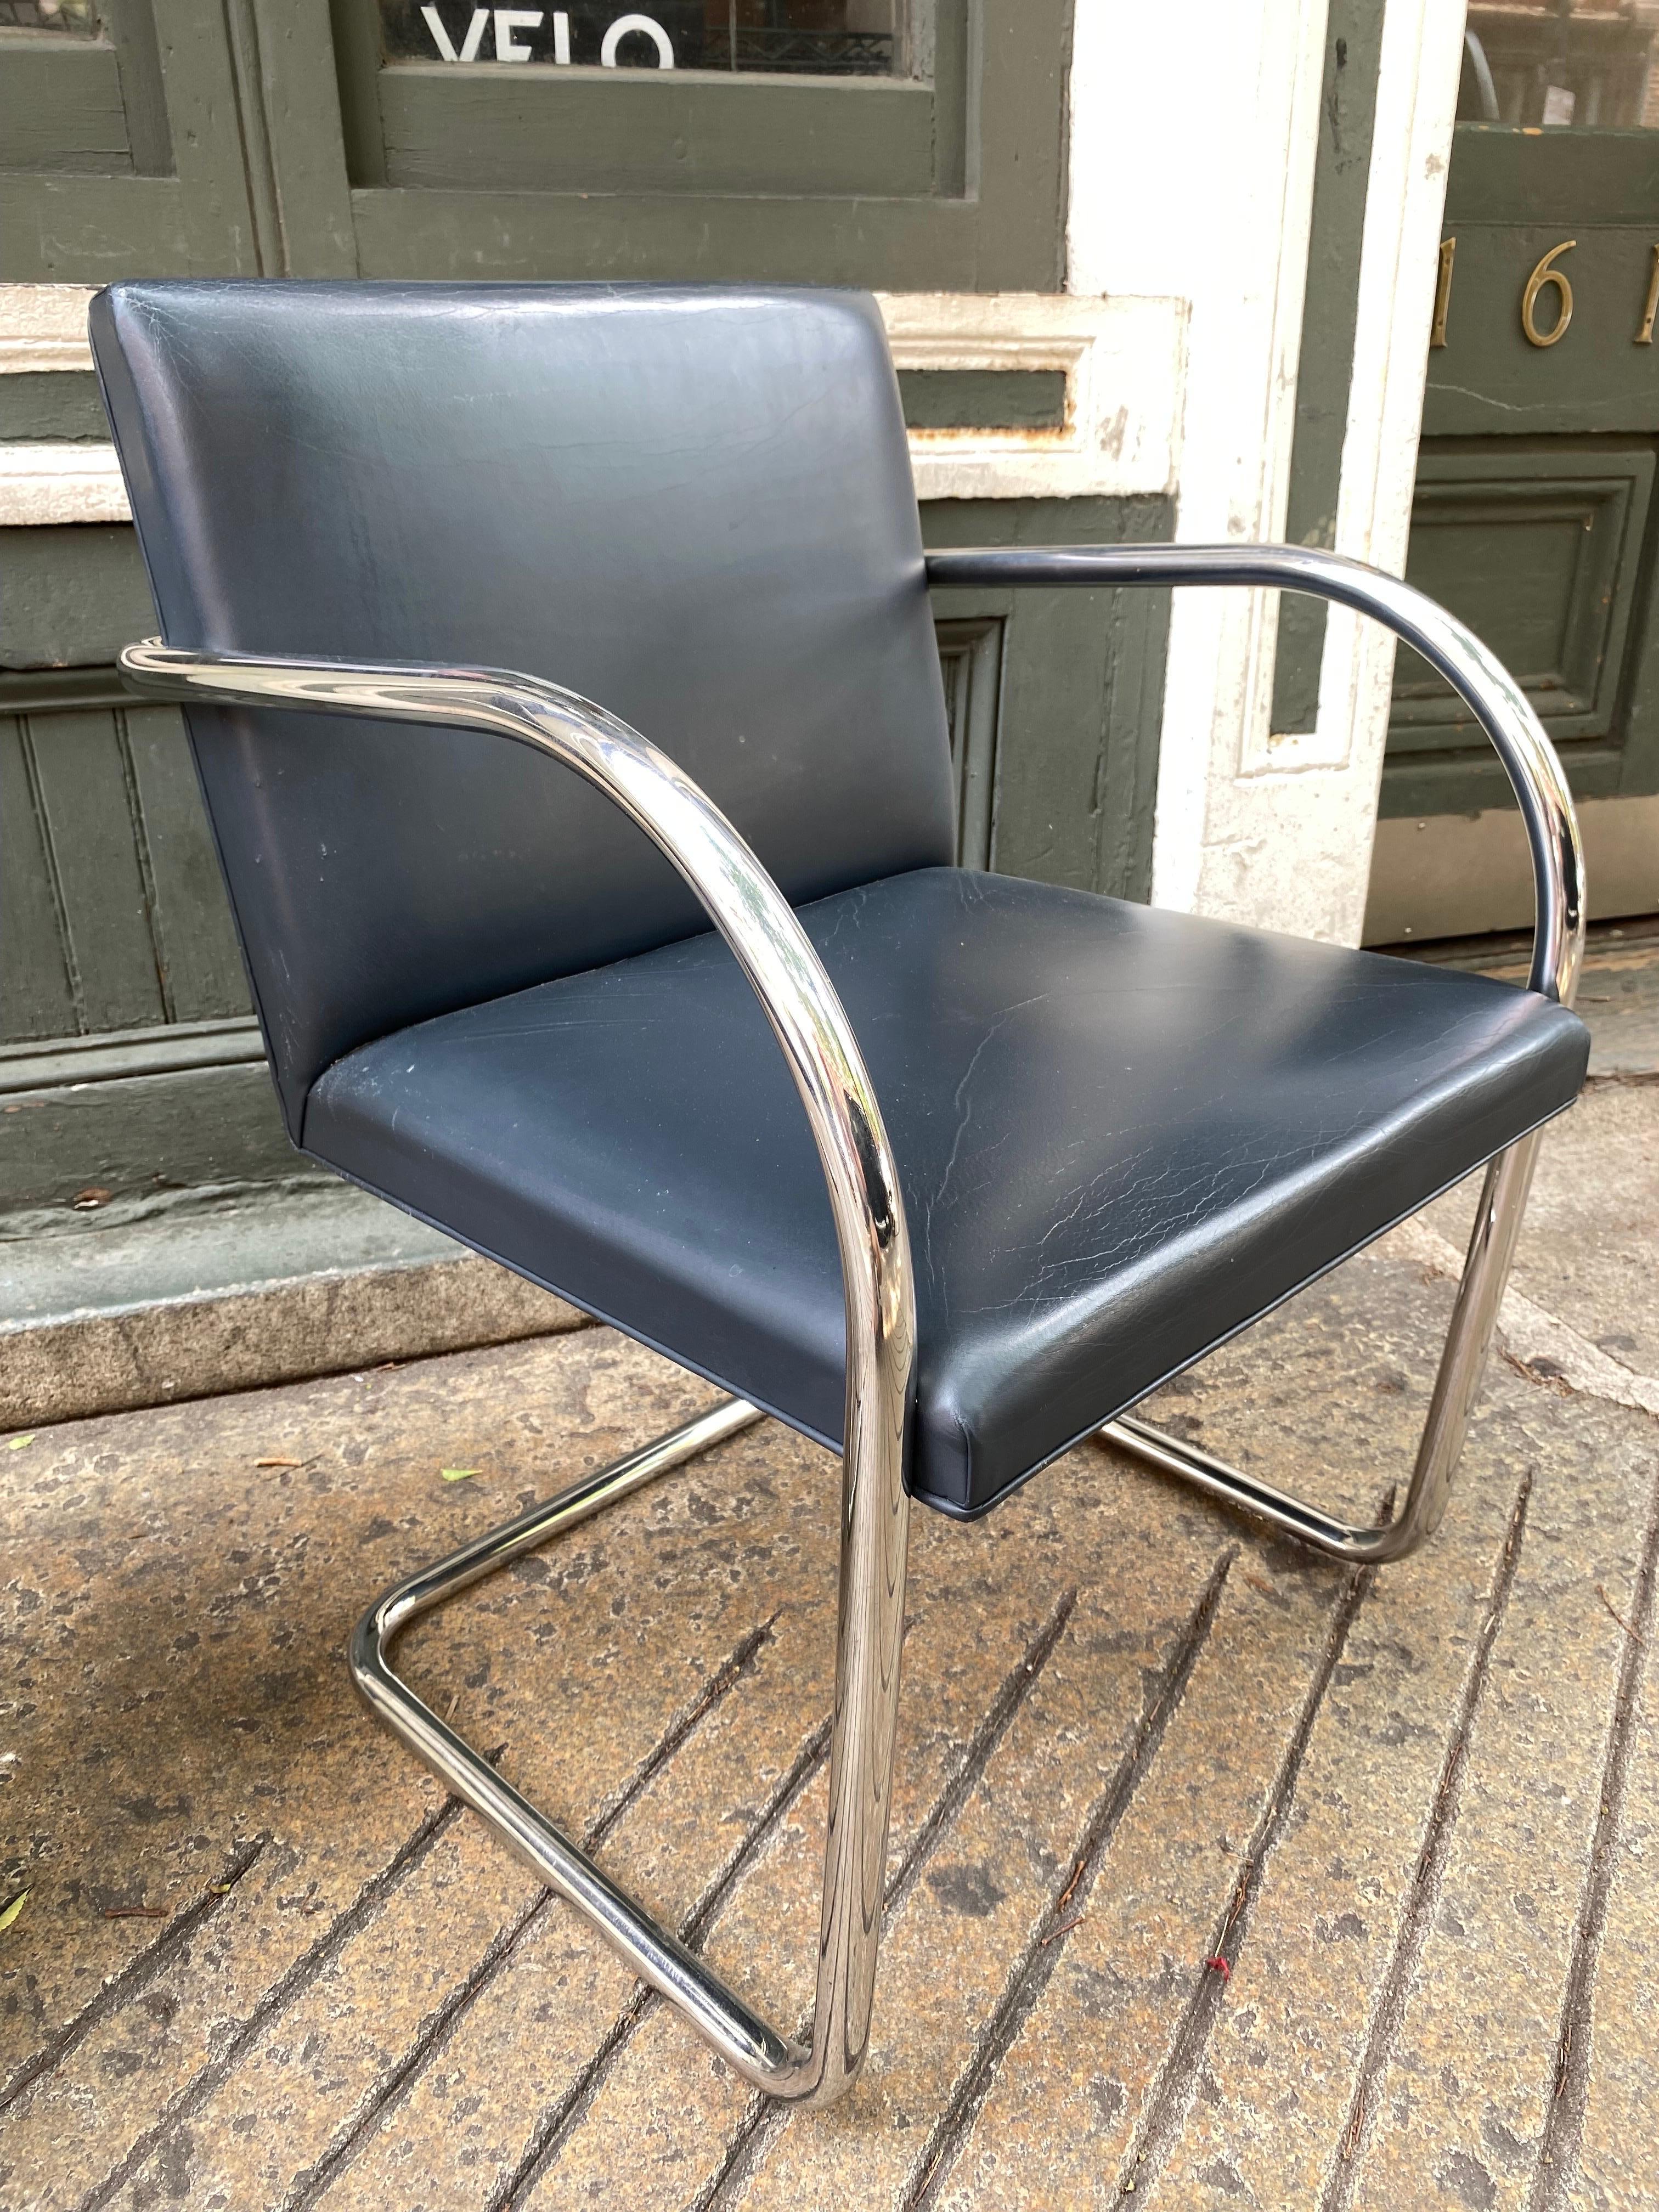 Mies van der Rohe Tubular Brno Chair, 2 available, priced separately. Chrome is super clean, leather shows wear and tear. Chairs are from the 1980's with Knoll labels. Use as is or redo in your choice of material! Classic Design that fits into so